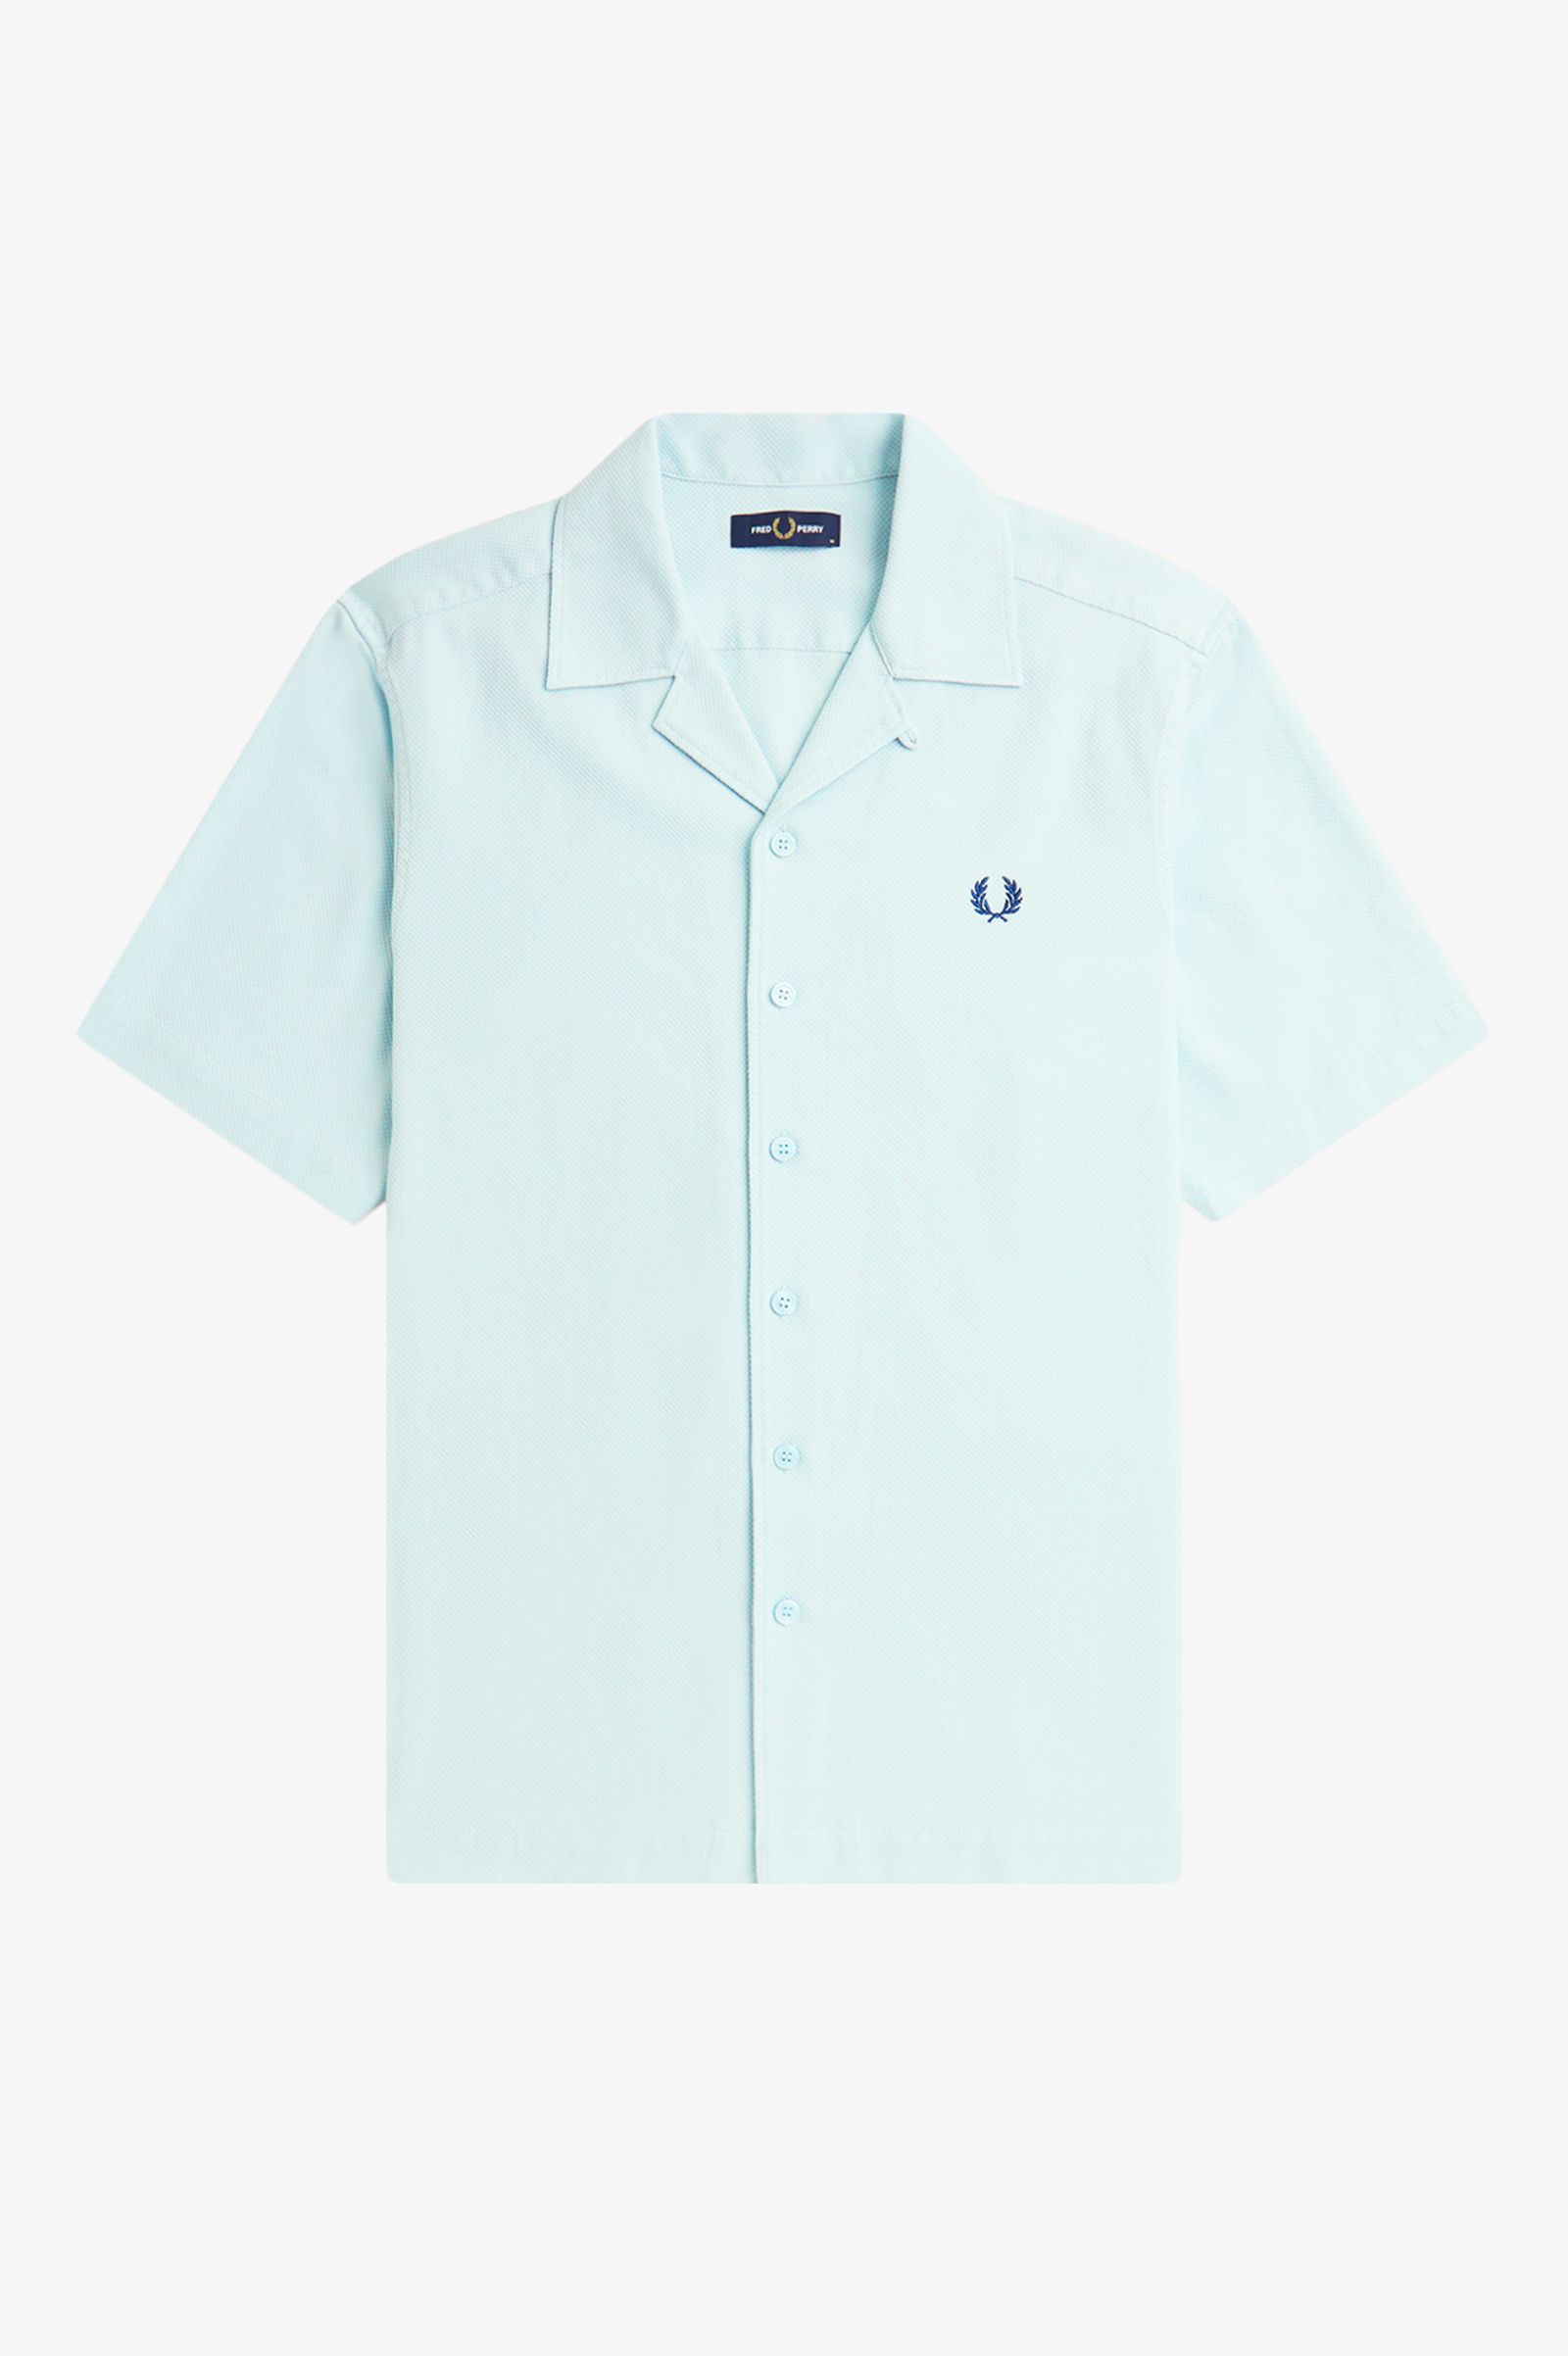 Fred Perry Pique Texture Revere Collar Shirt - Light Ice